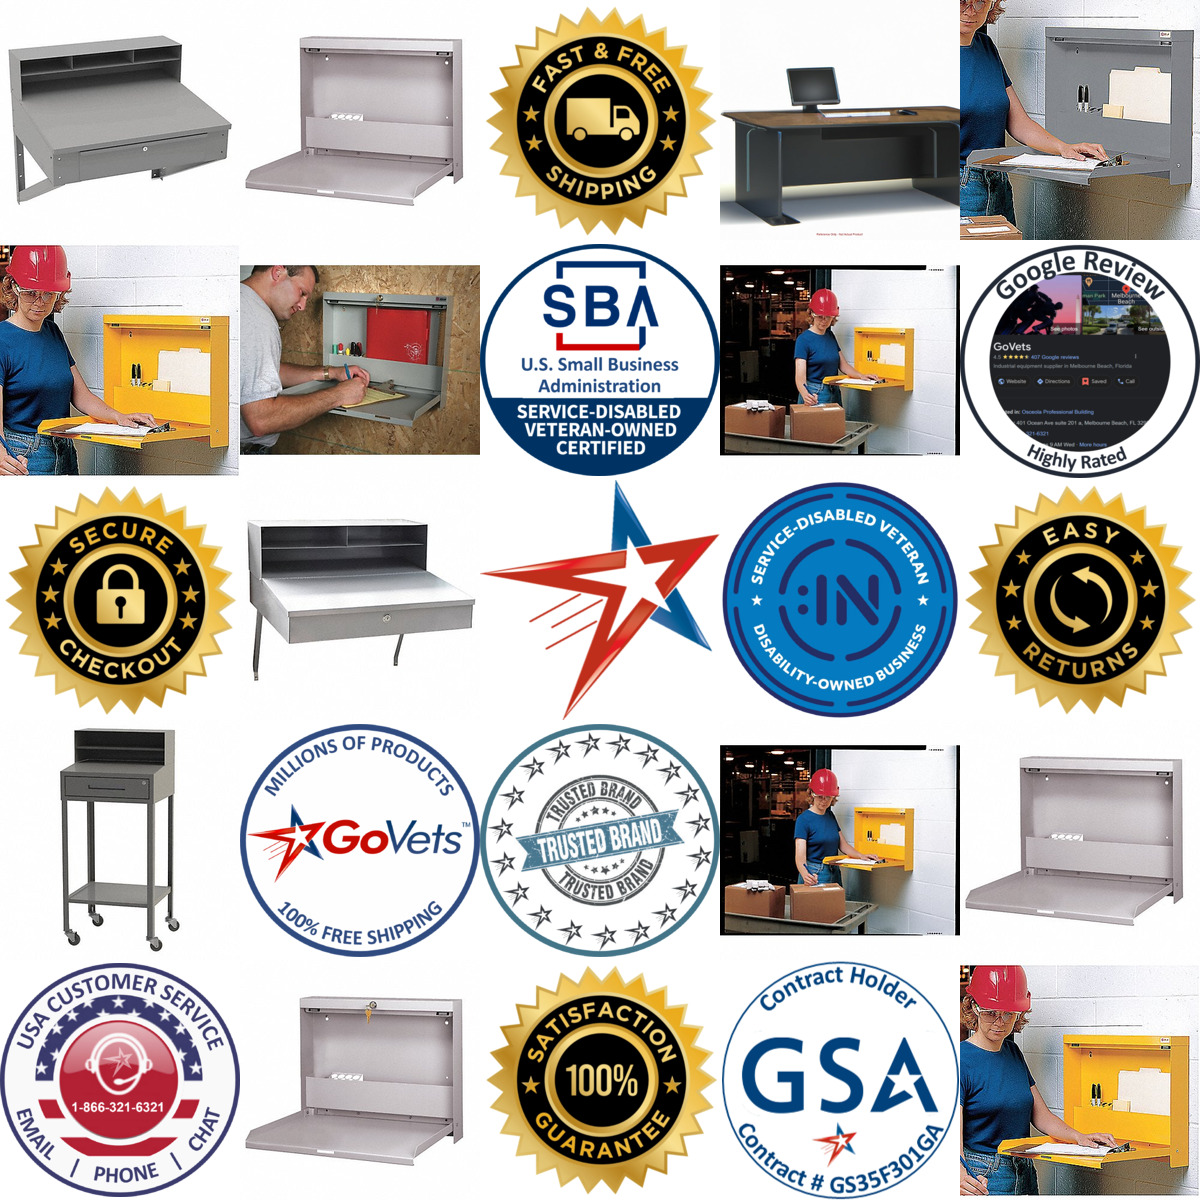 A selection of Wall Mount Desks products on GoVets